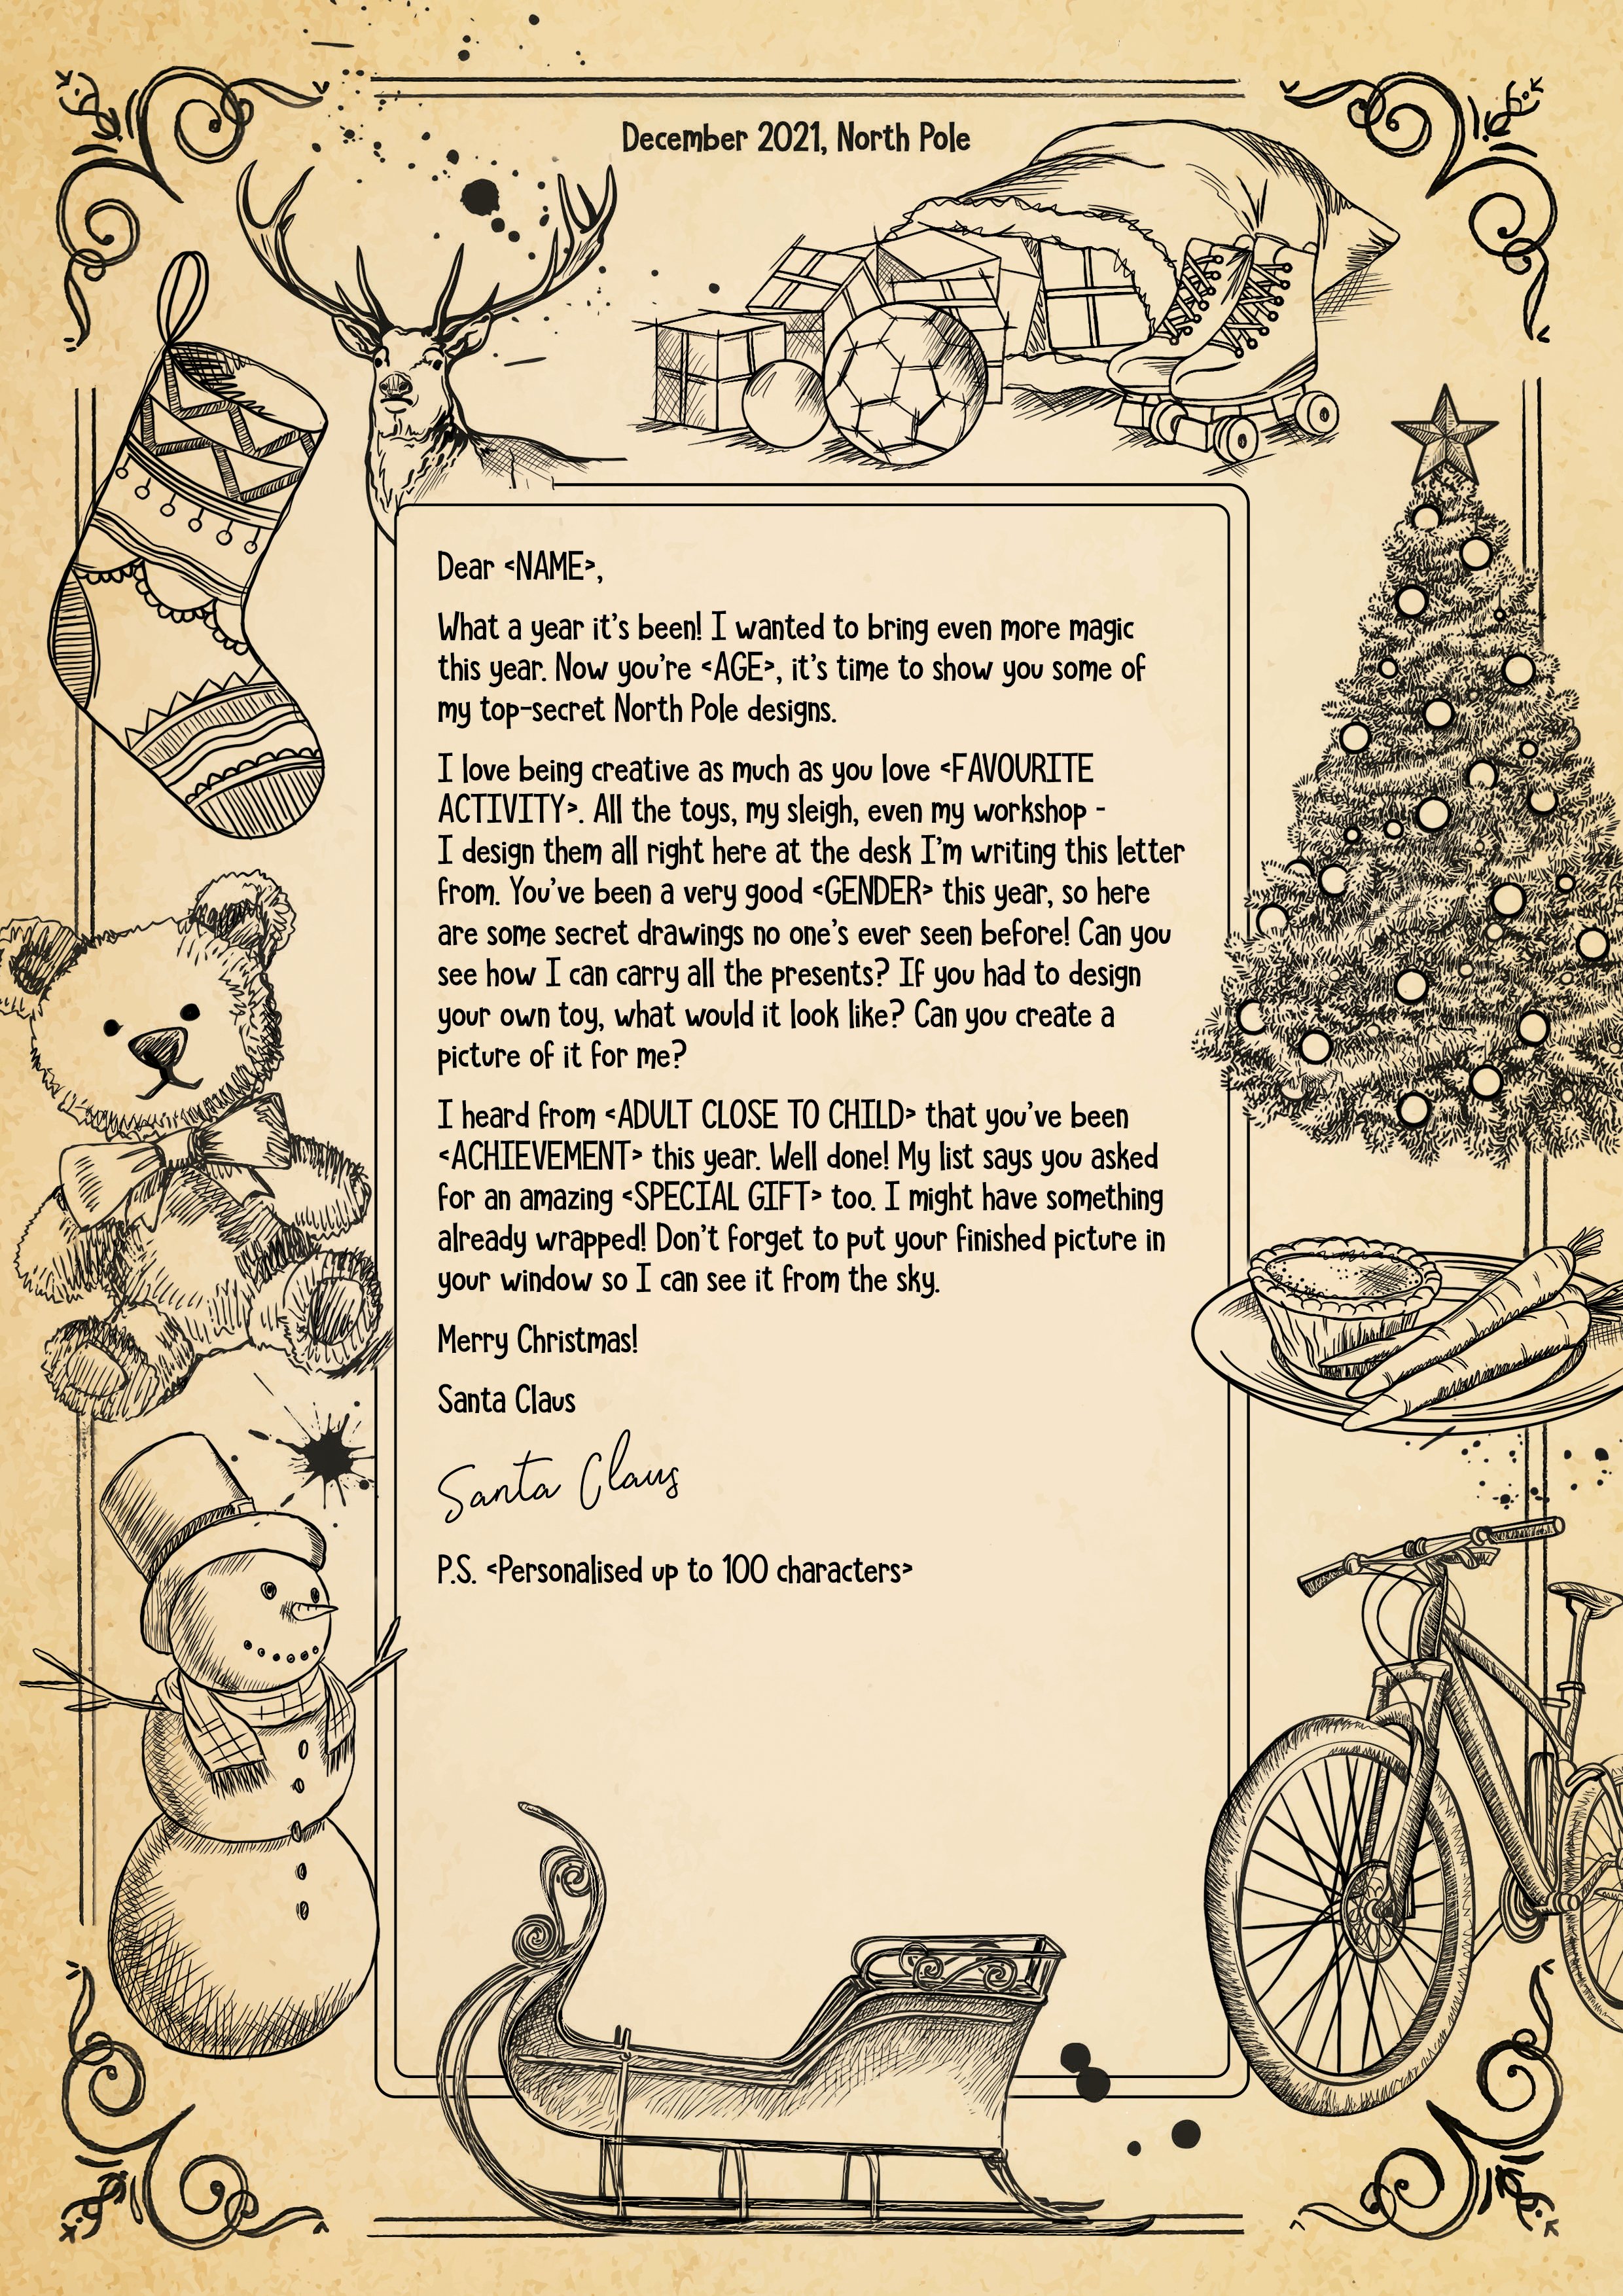 34116_art_NSPCC_Christmas_Letter_2021_Authentic_210x297mm_ENG.jpg